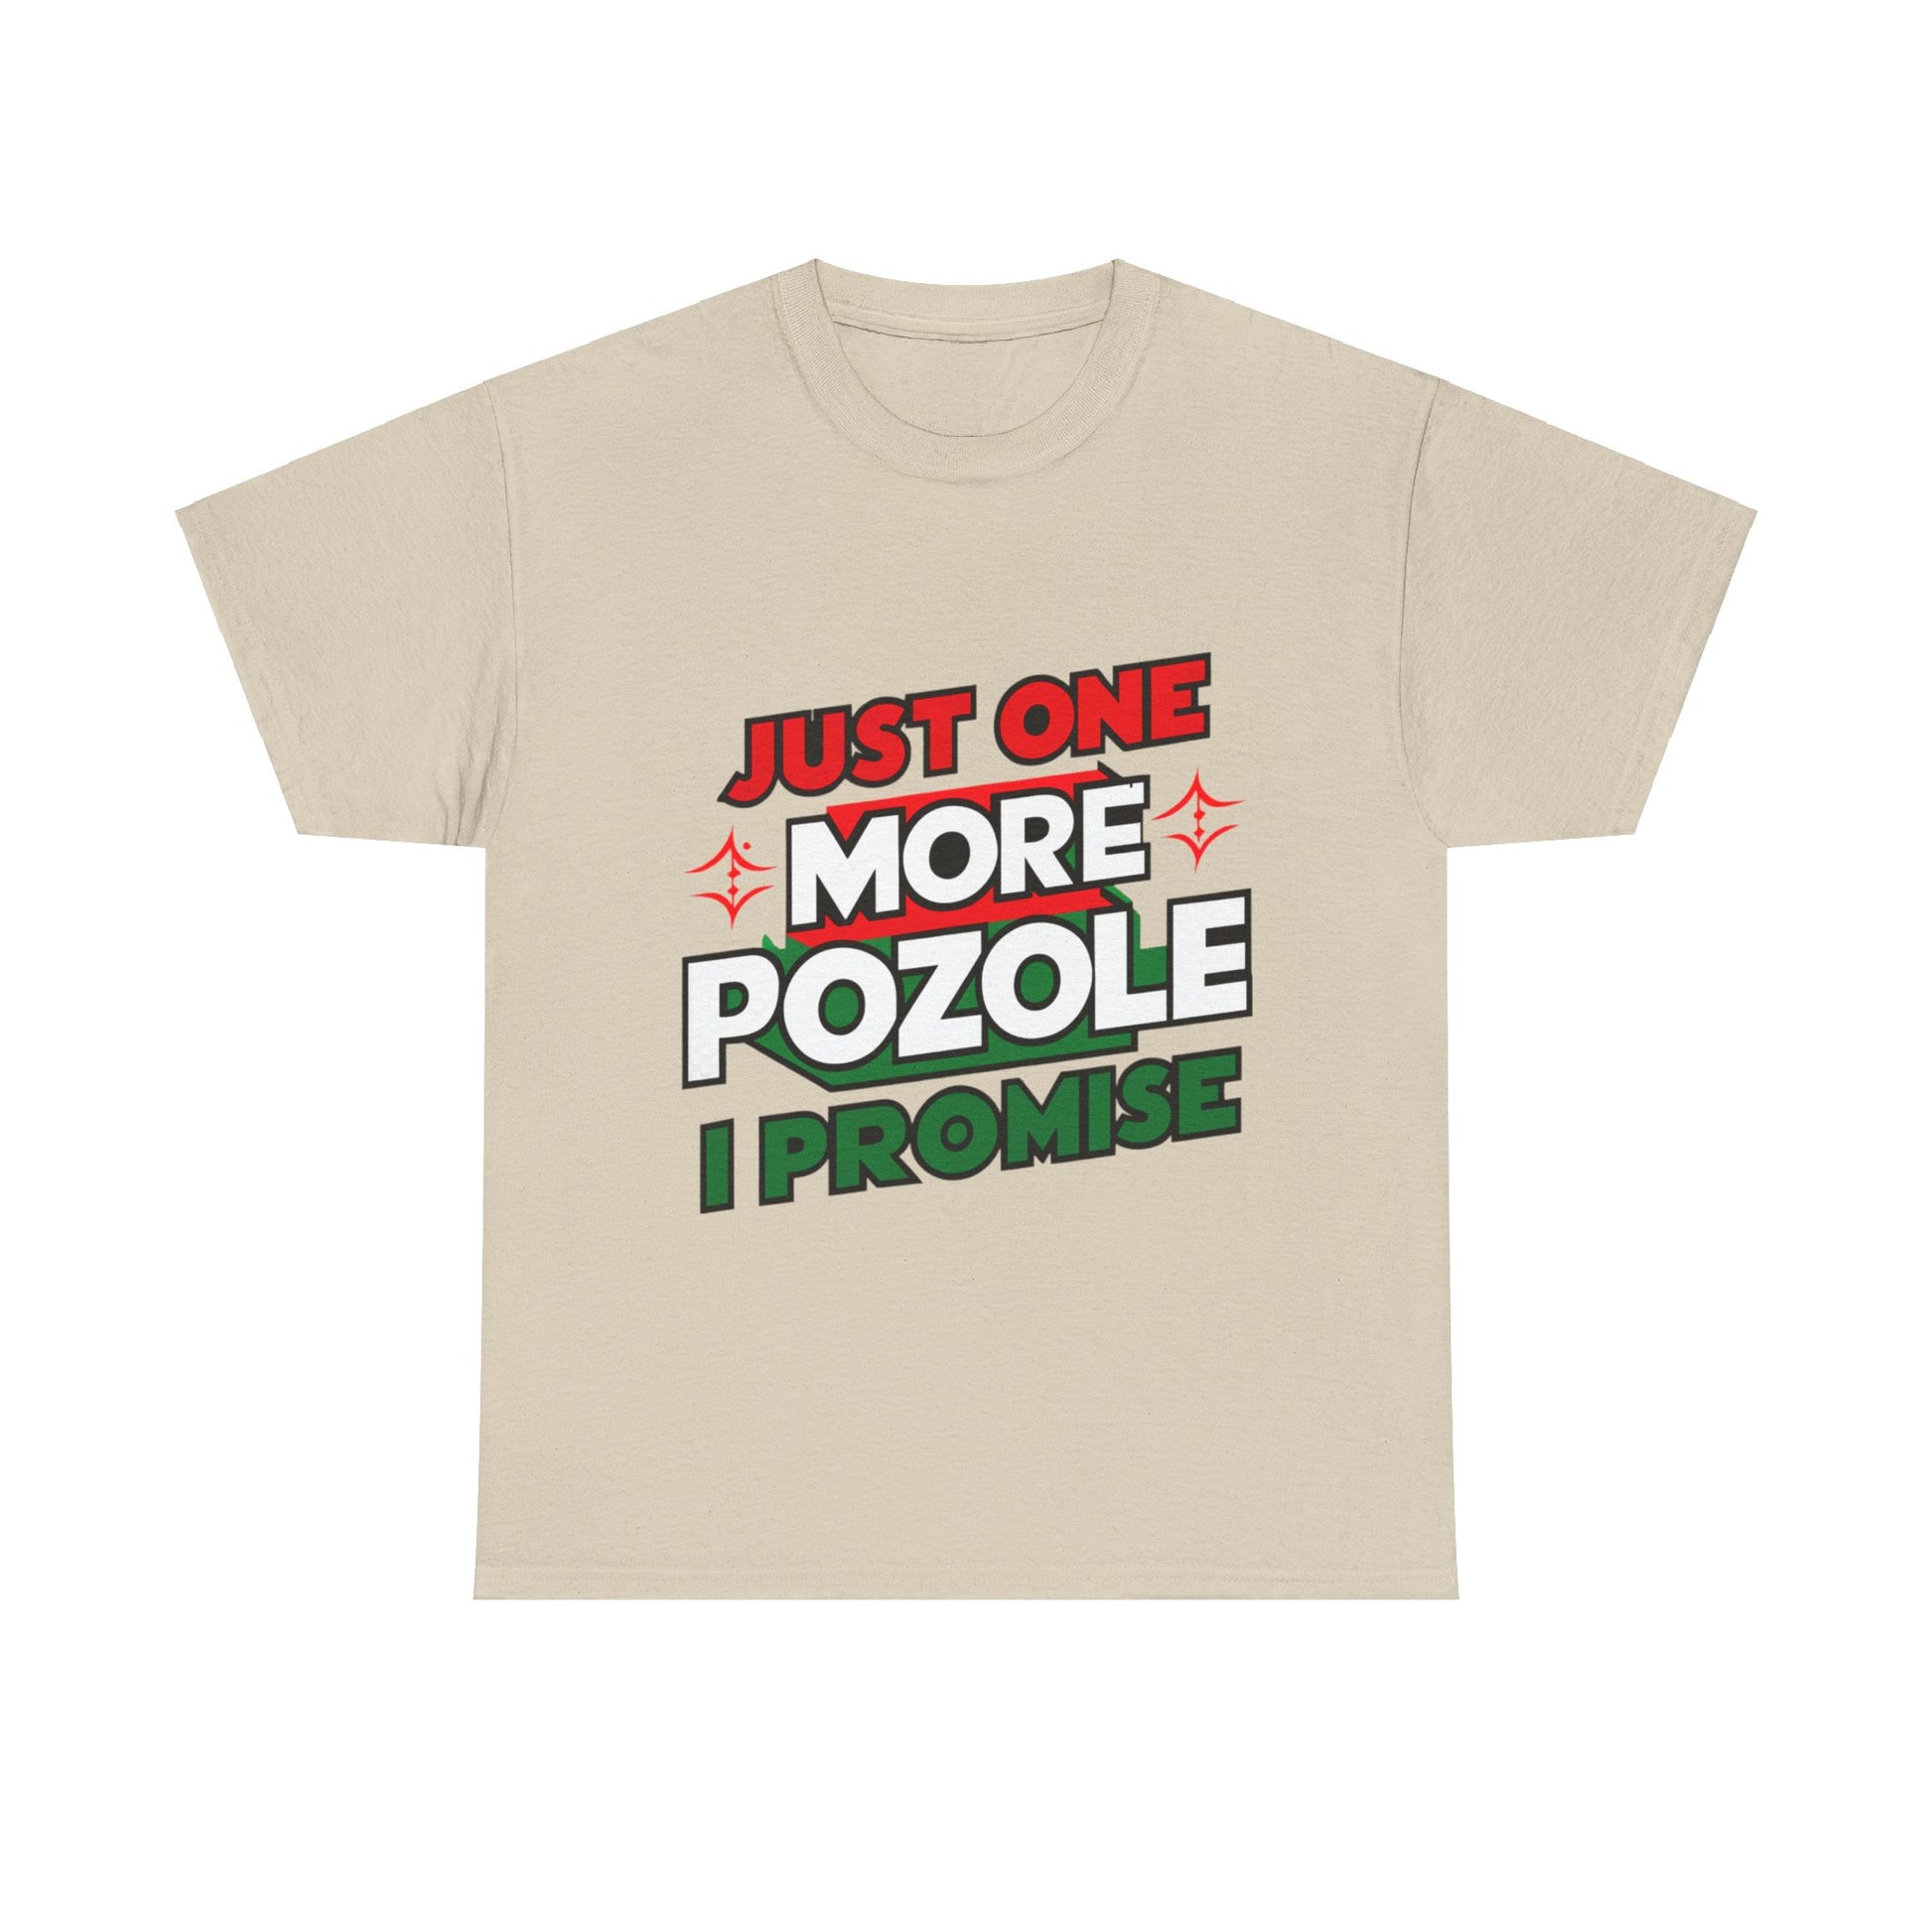 Just One More Pozole I Promise Mexican Food Graphic Unisex Heavy Cotton Tee Cotton Funny Humorous Graphic Soft Premium Unisex Men Women Sand T-shirt Birthday Gift-8